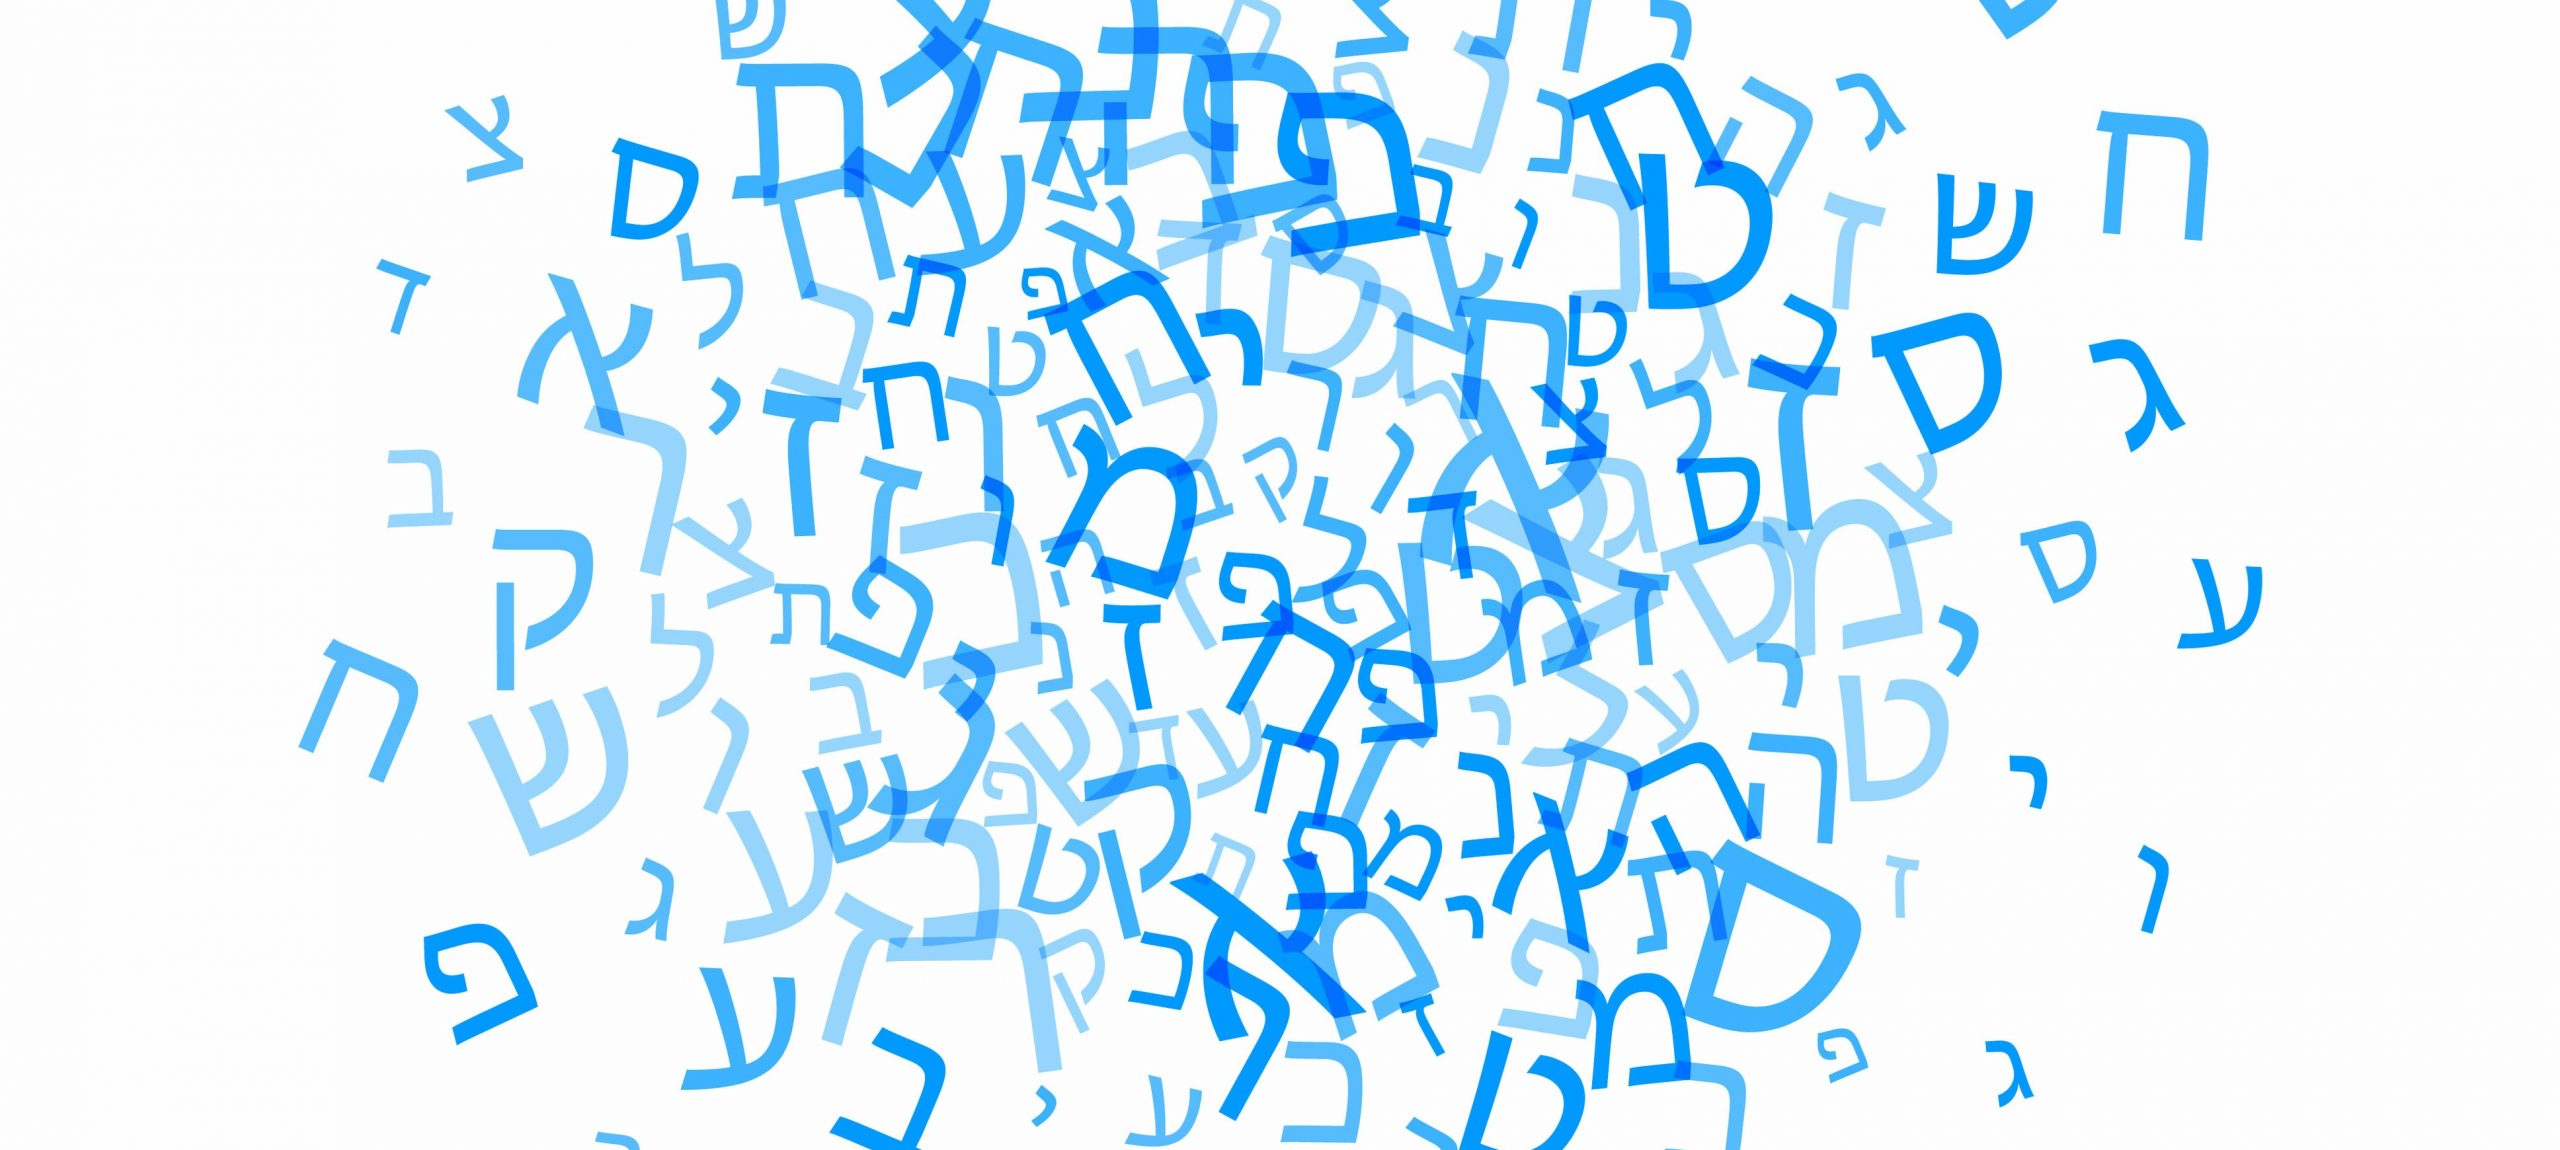 10 Yiddish Words You Have To Know - Judaica in the Spotlight